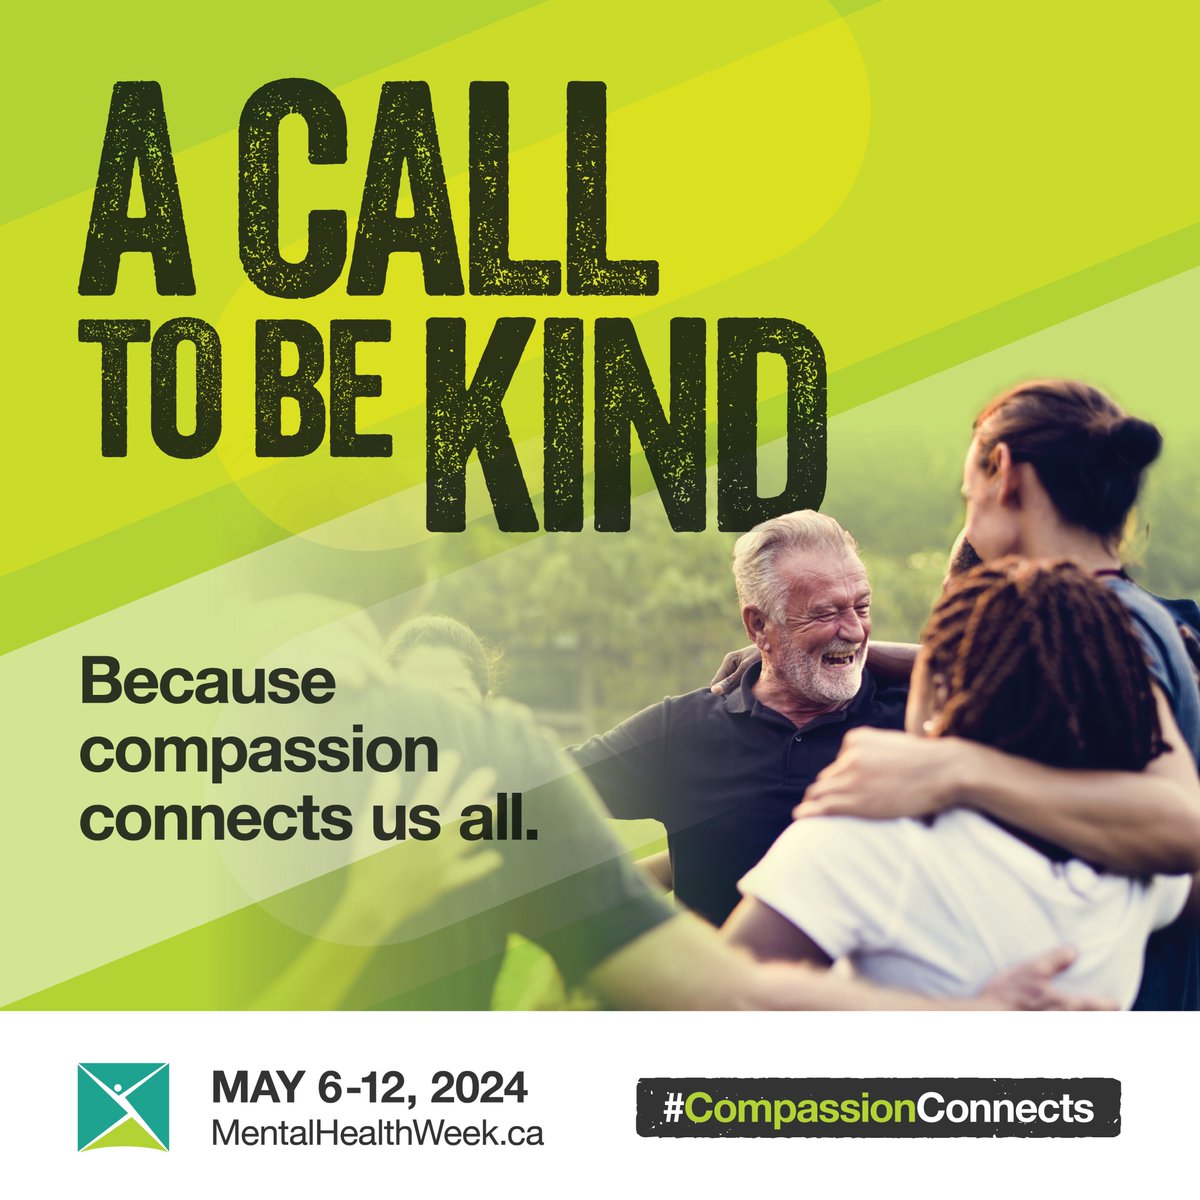 Compassion isn't just about being kind to others, it's about extending that same kindness to ourselves!
#MentalHealthWeek #CompassionConnects #bekind #bekindtoyourself #bowvalley #PCSBV